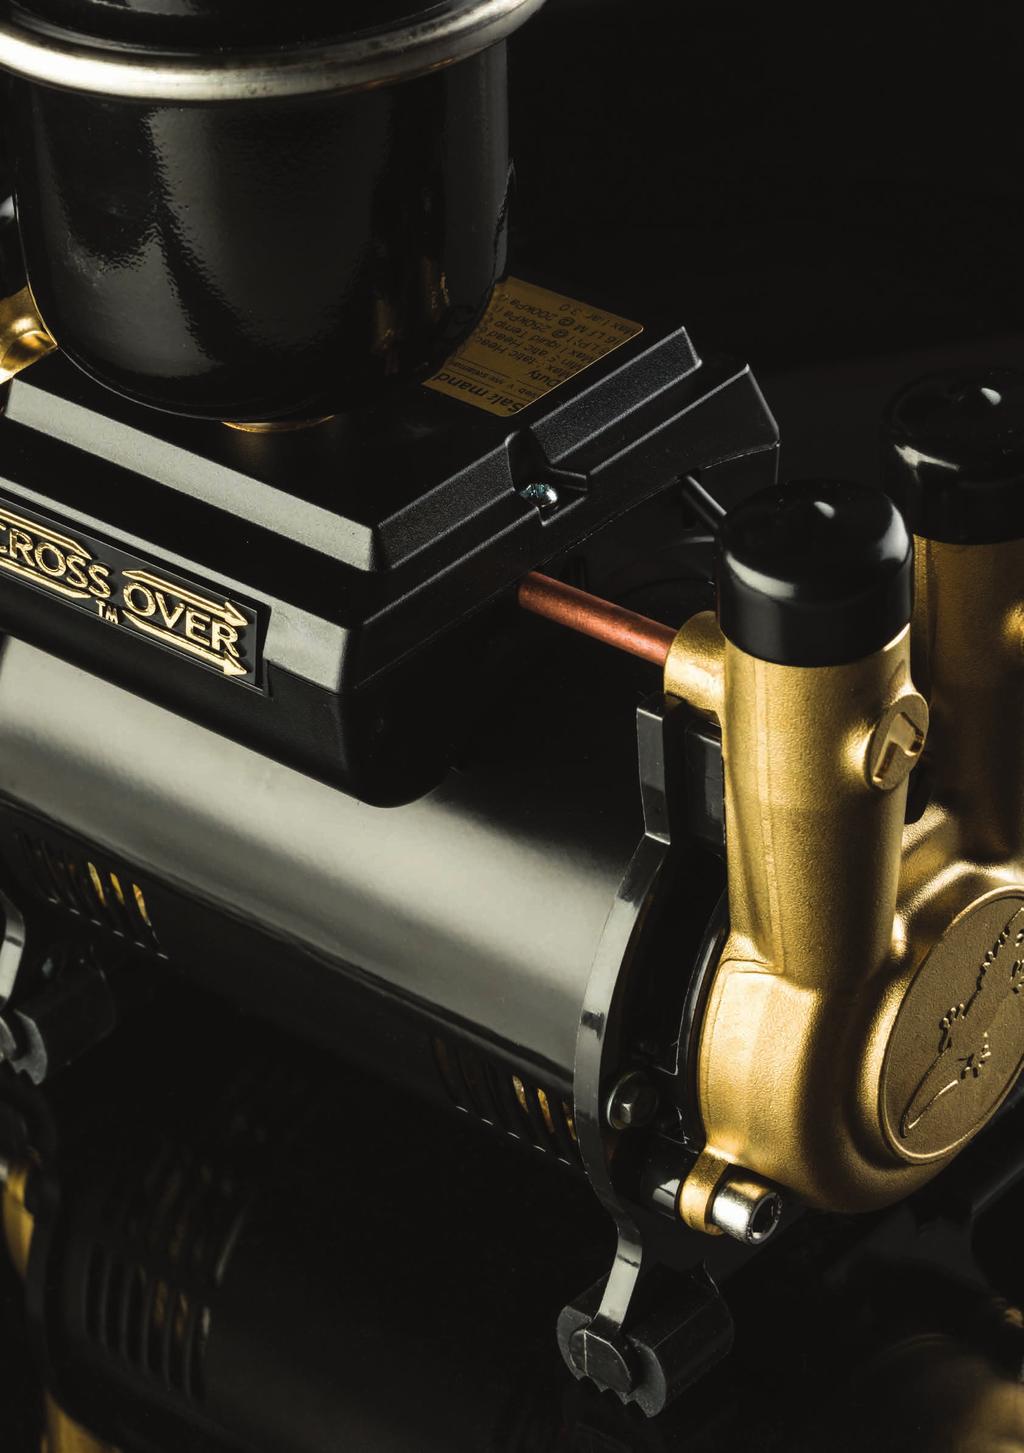 12 SHOWERBOOST 13 CT FORCE Built with robust brass ends and brass impellers this range of pumps has been engineered to be some of the quietest brass pumps on the market.